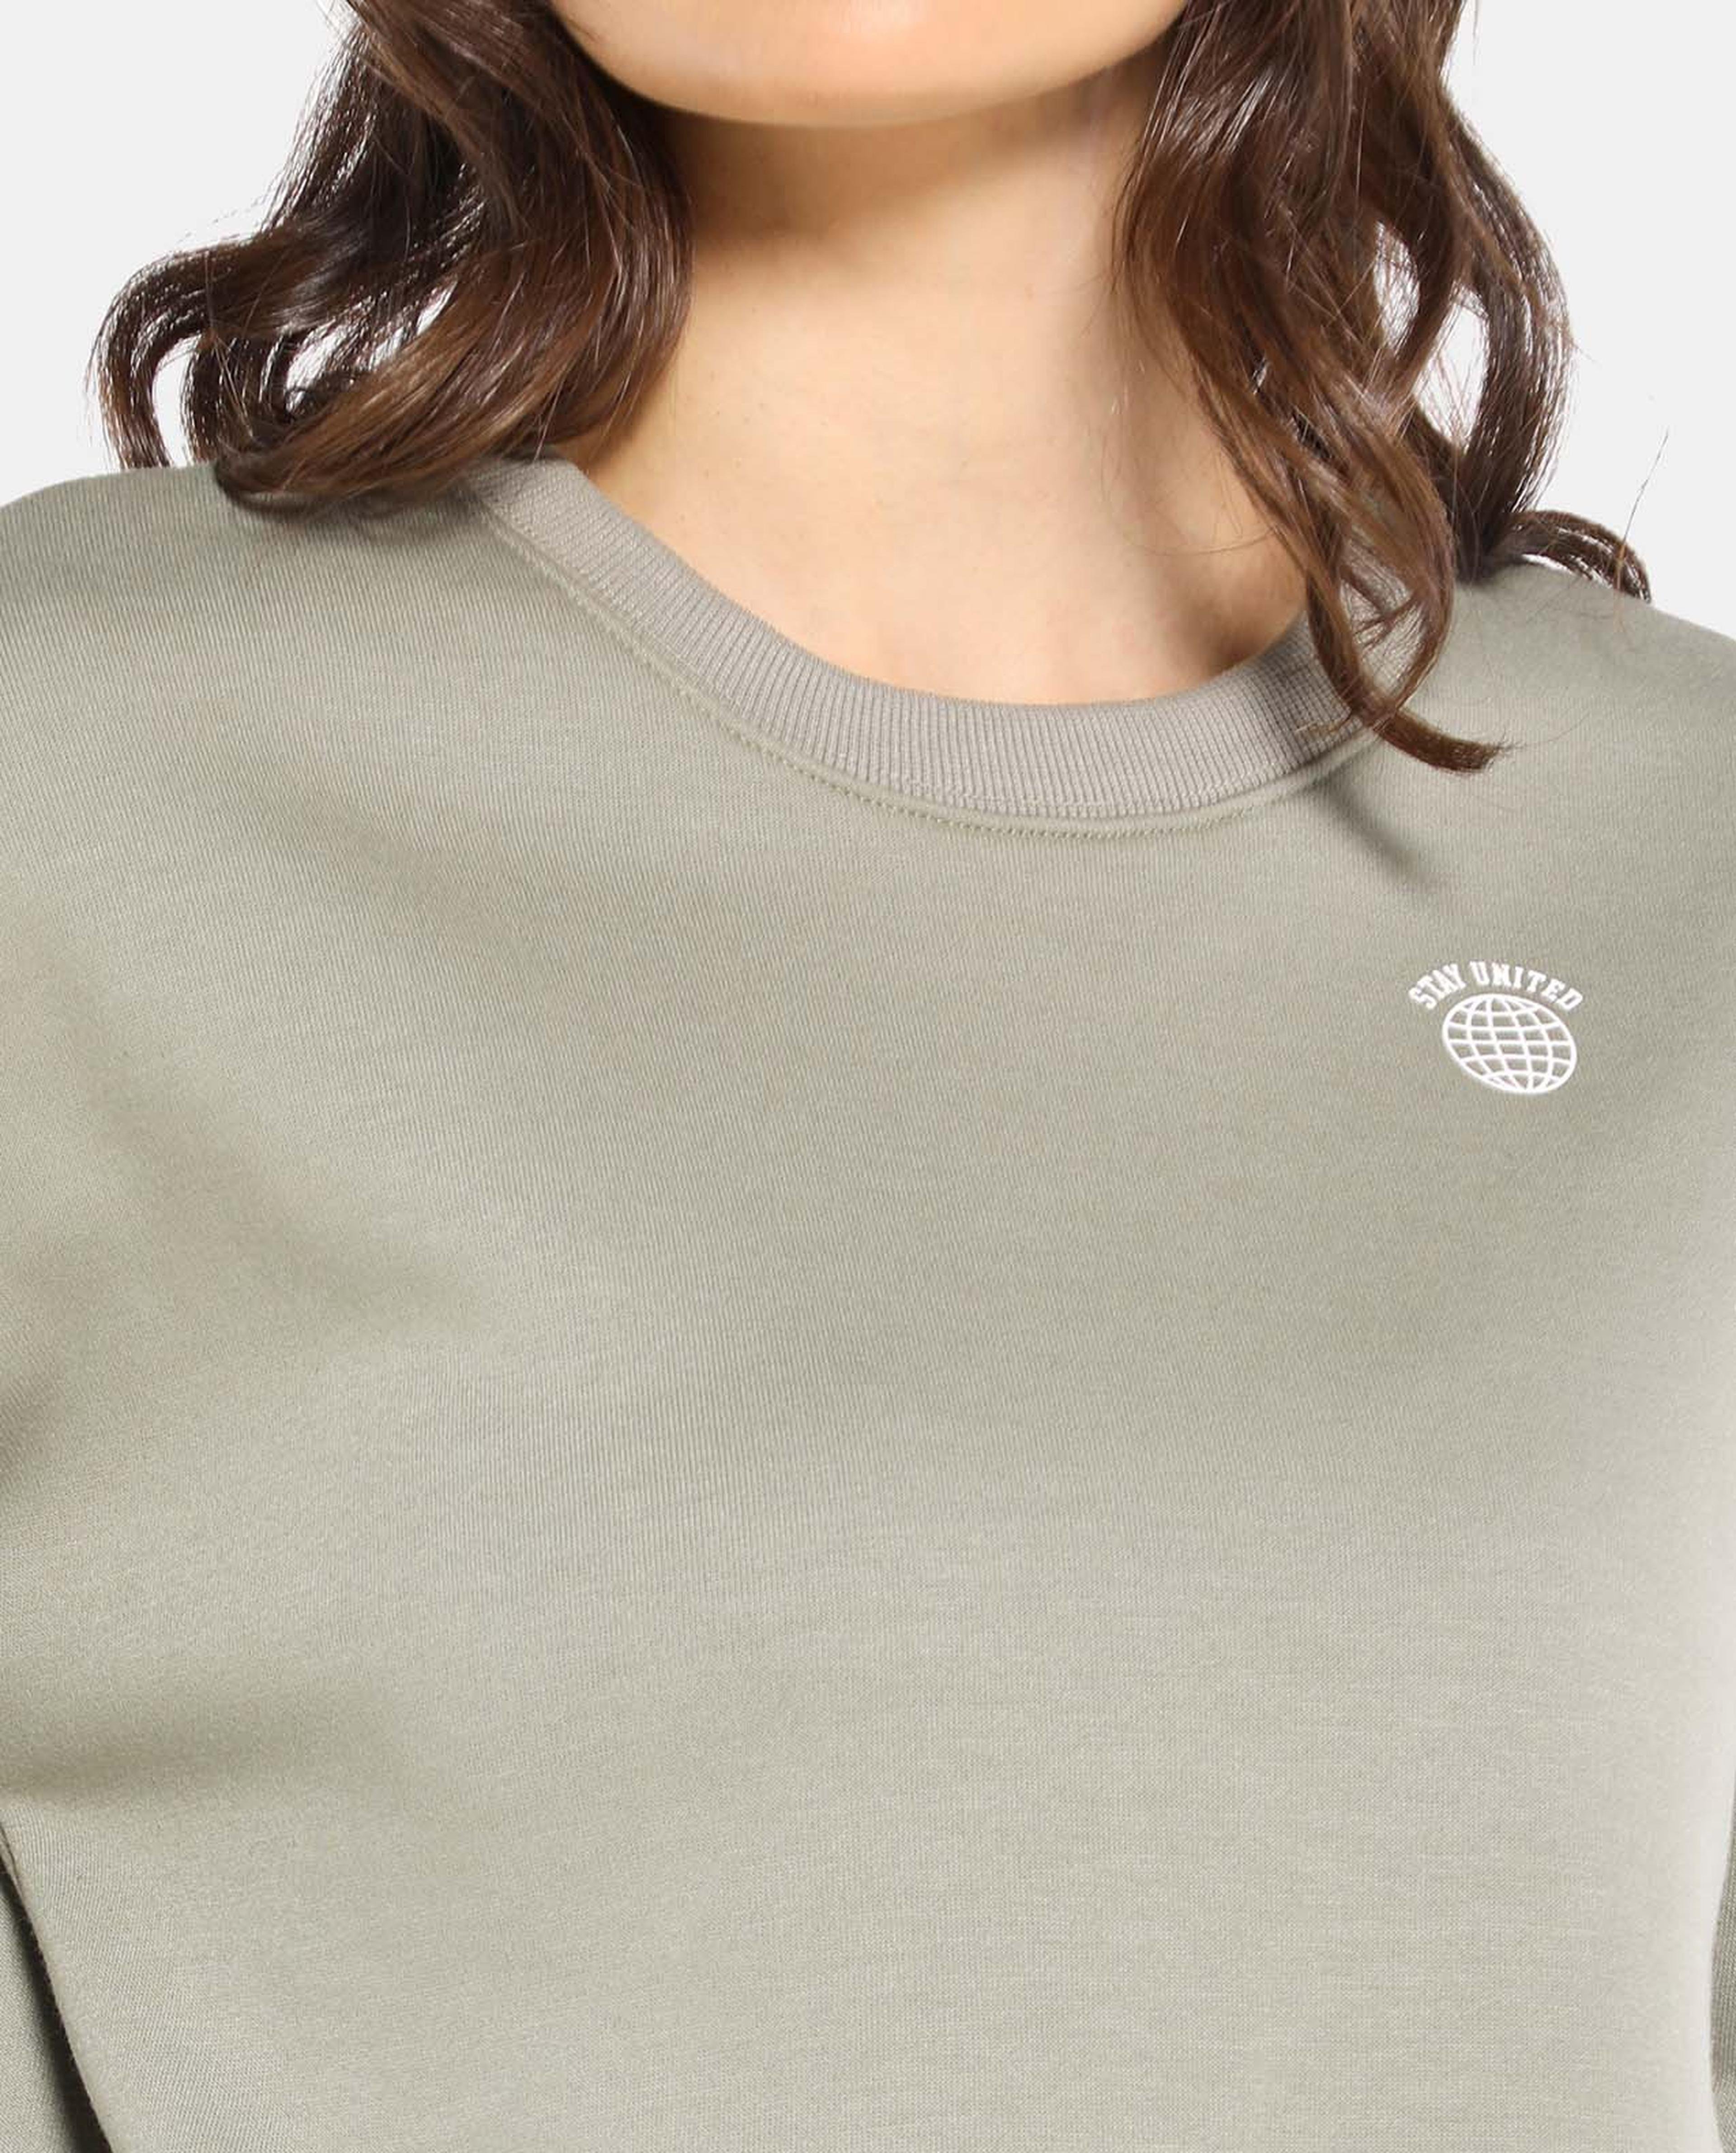 Green Polyester Sweater Top